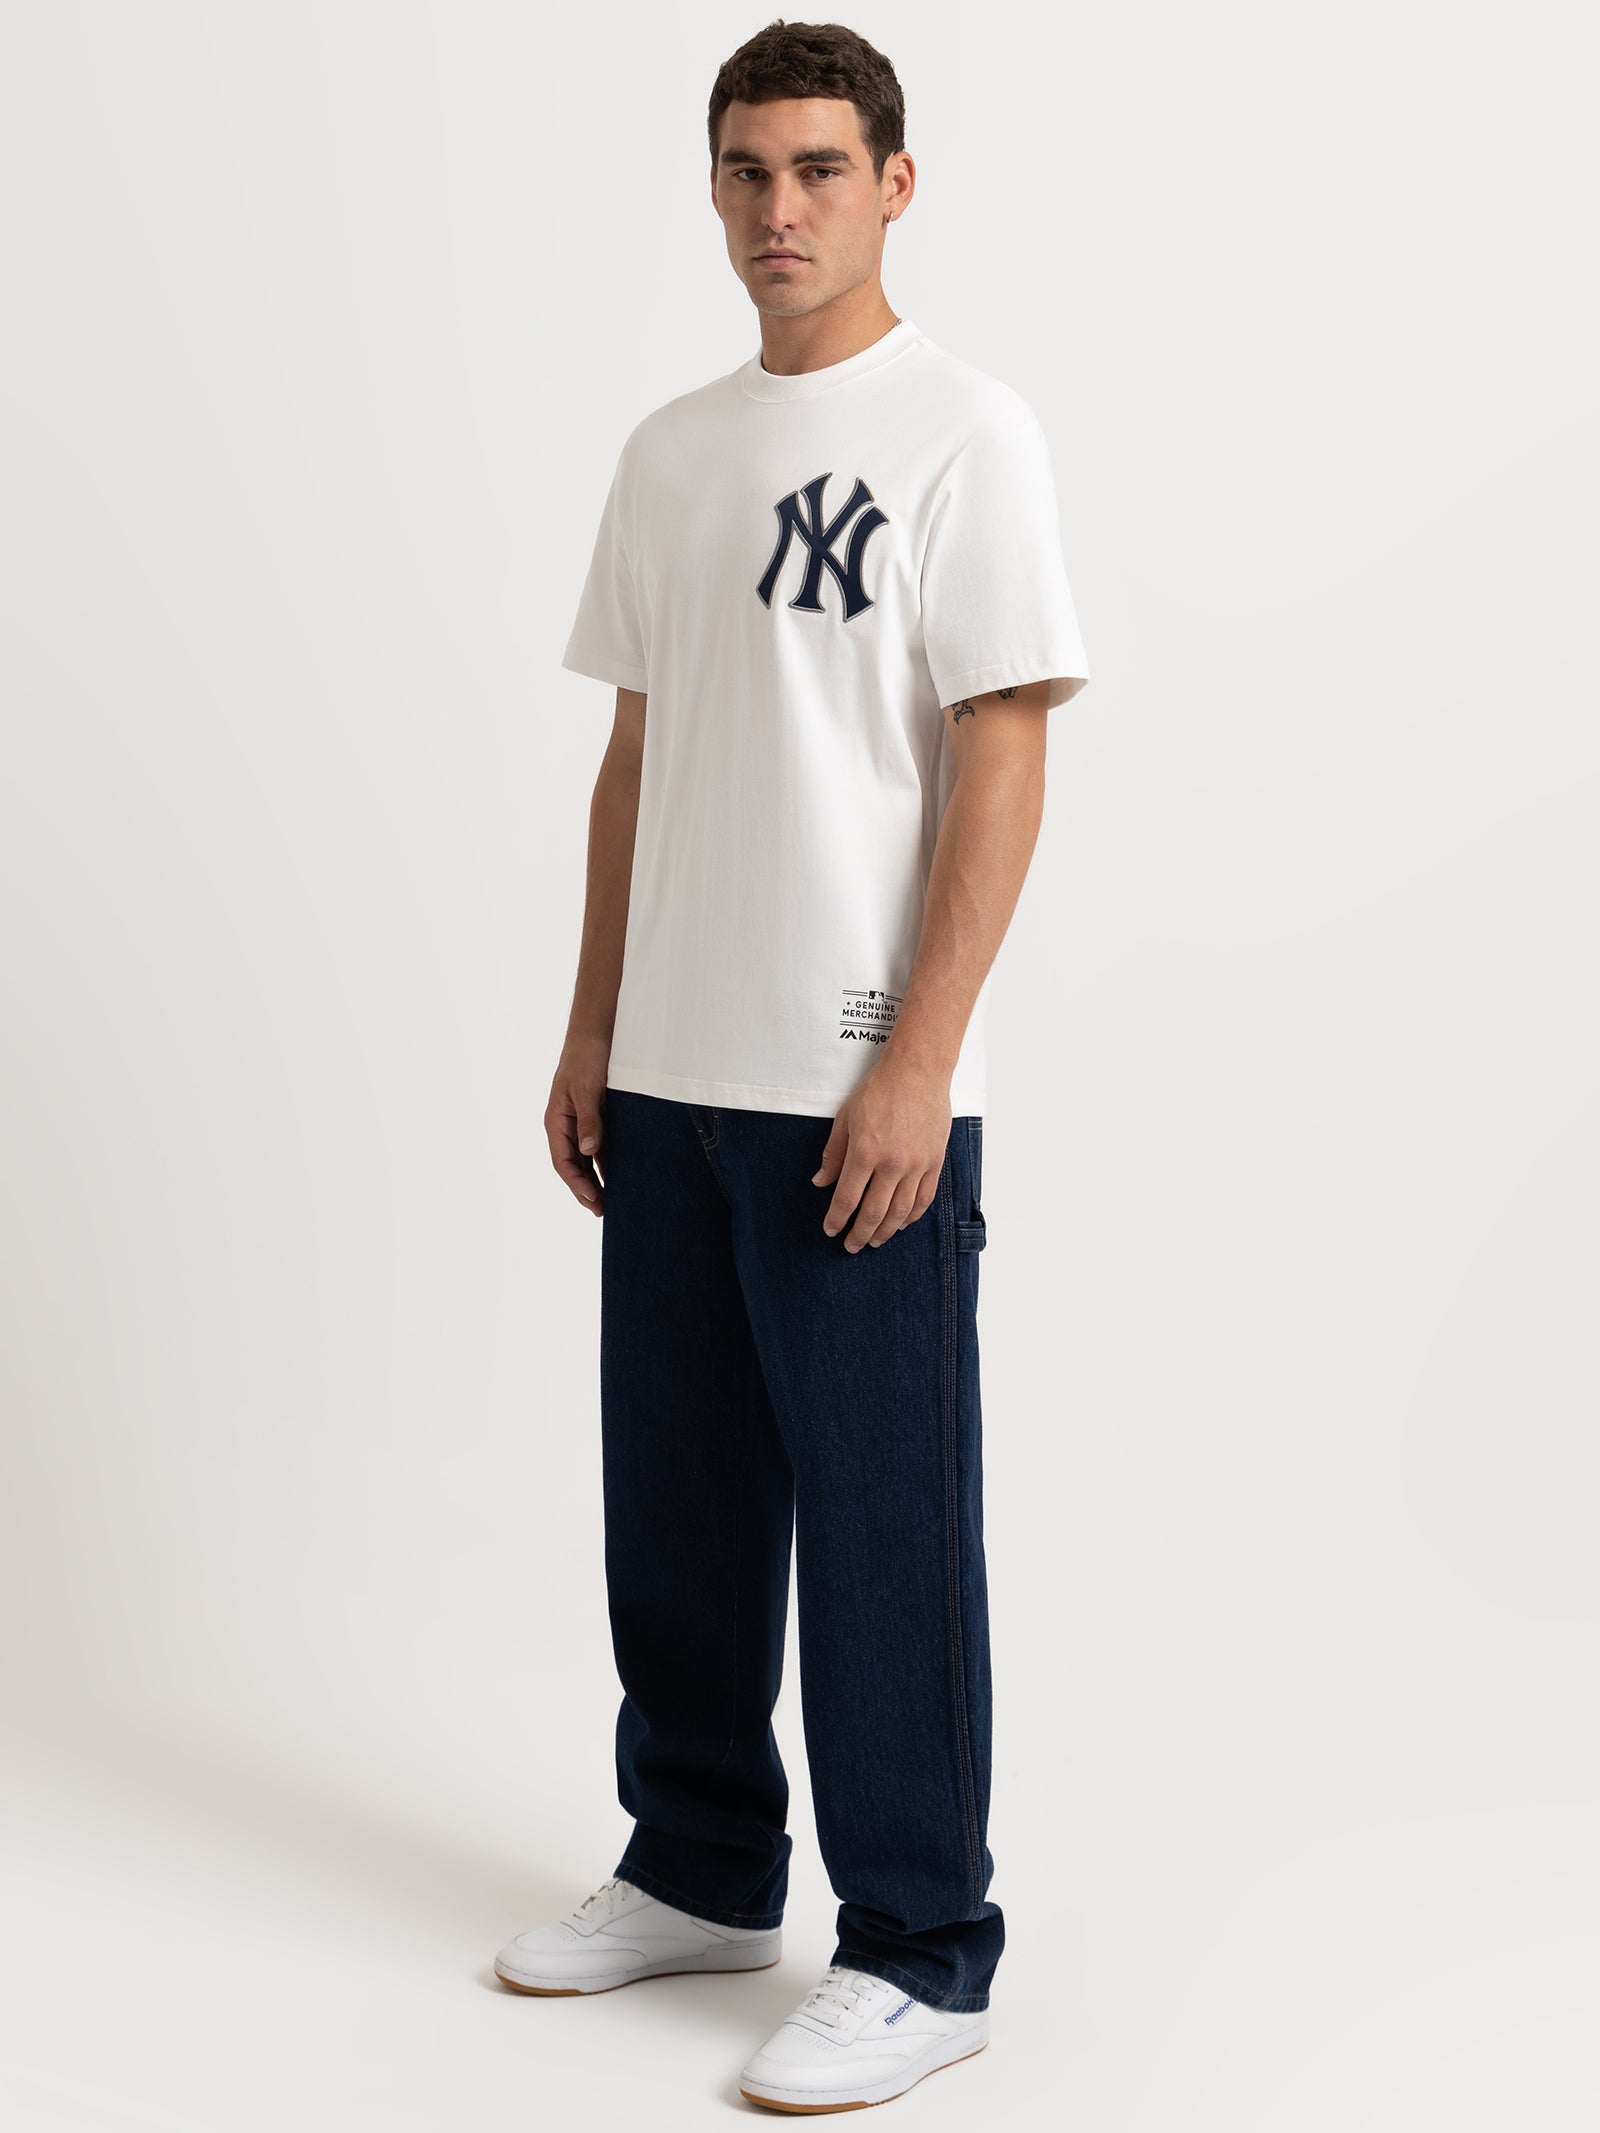 NY Yankees Team Crest T-Shirt in Vintage White - Glue Store